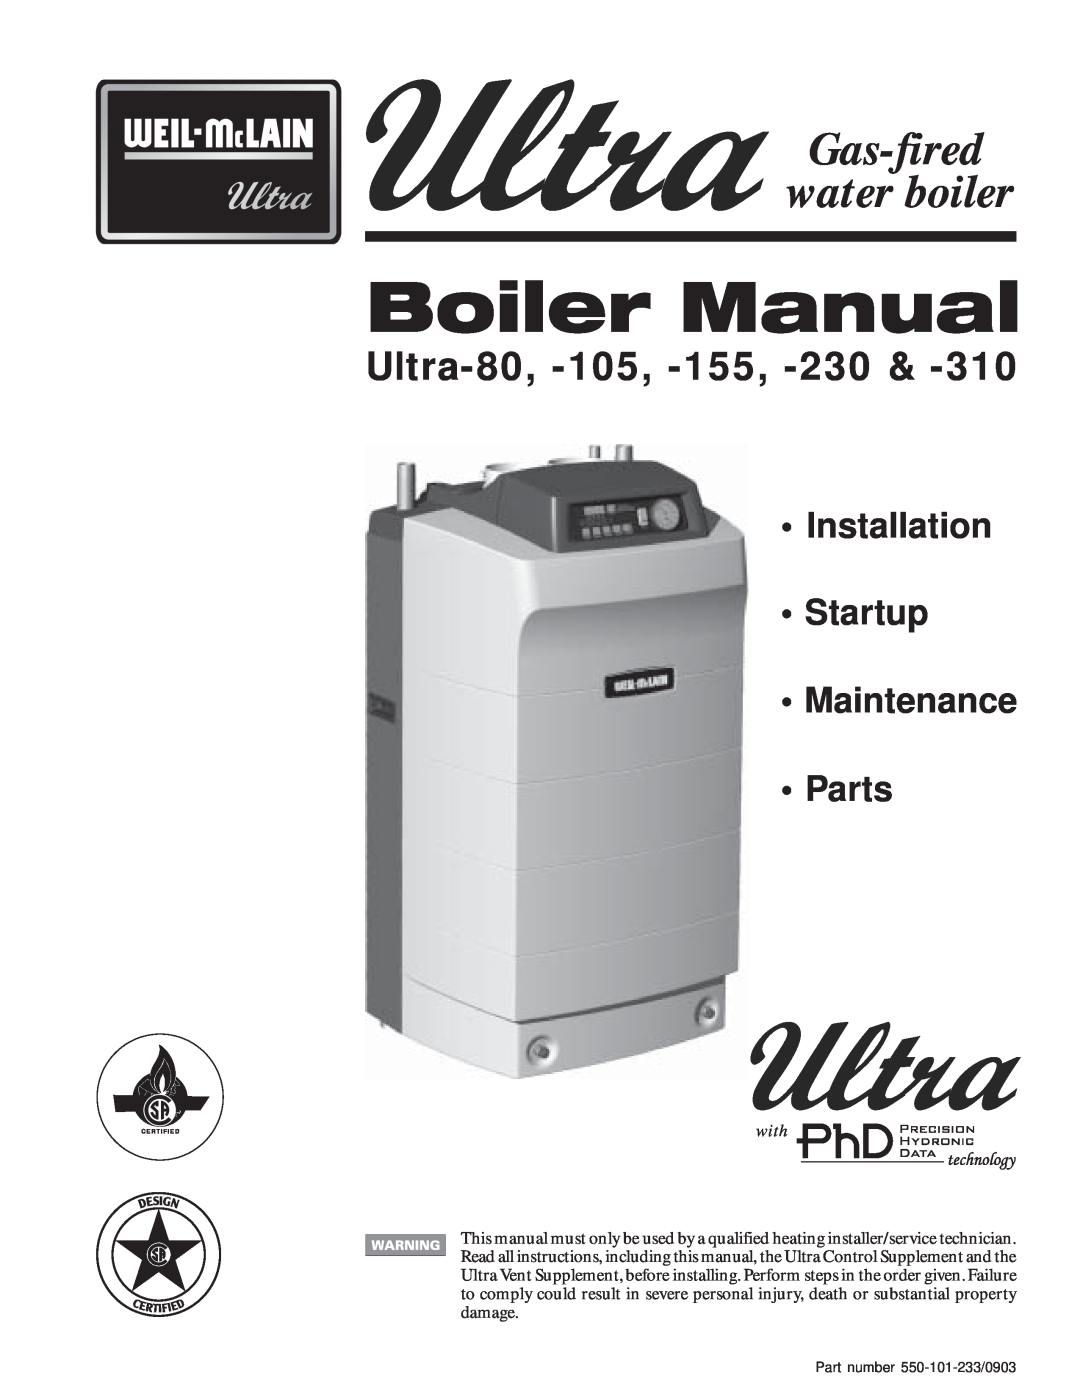 Weil-McLain 230, 310, 155 manual Gas-fired water boiler, Ultra-80, -105, Installation Startup Maintenance Parts, with 